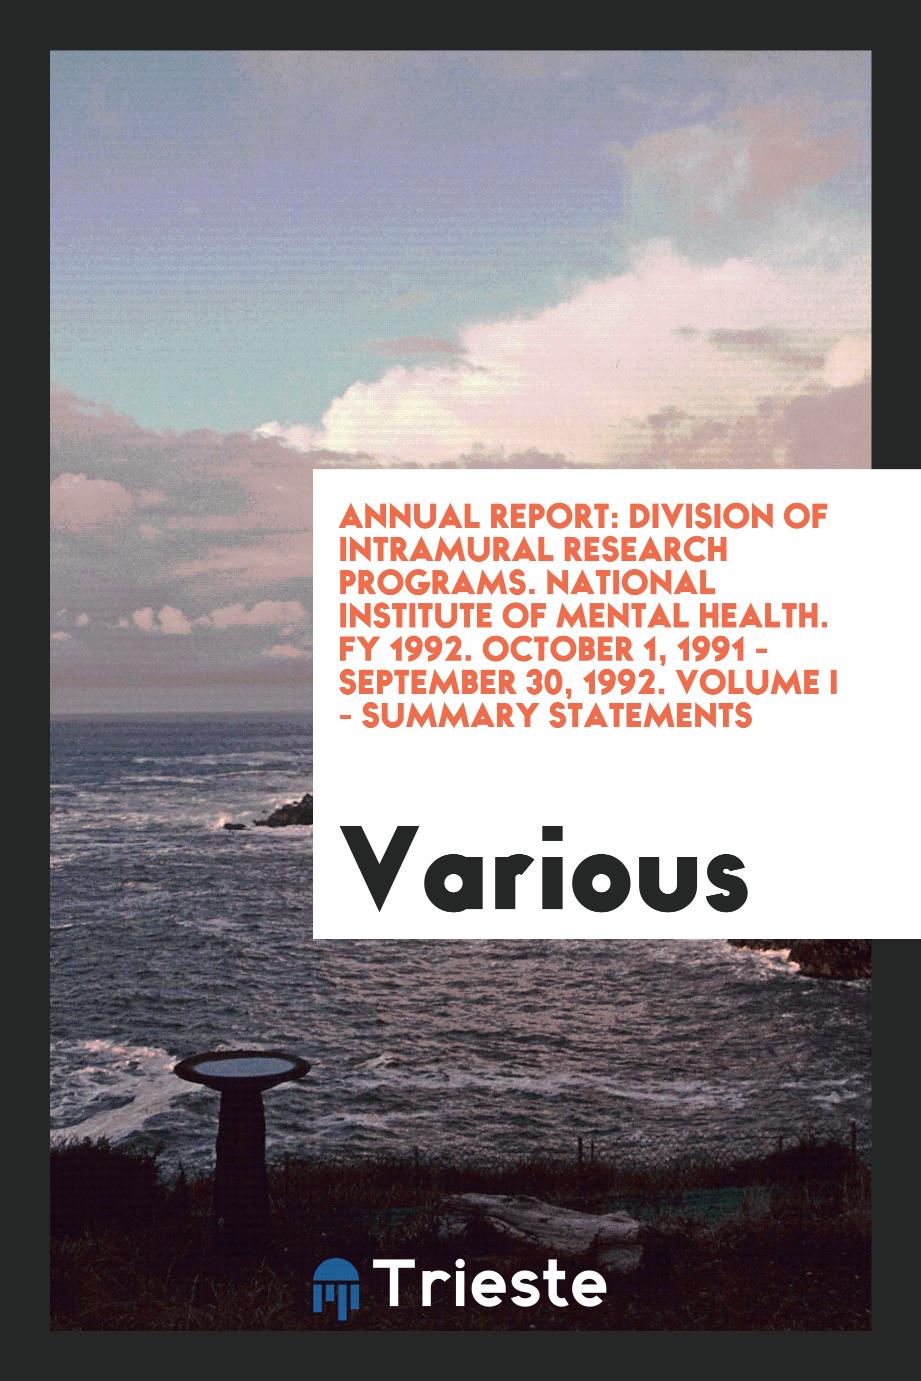 Annual report: Division of Intramural Research Programs. National Institute of Mental Health. FY 1992. October 1, 1991 - September 30, 1992. Volume I - Summary statements